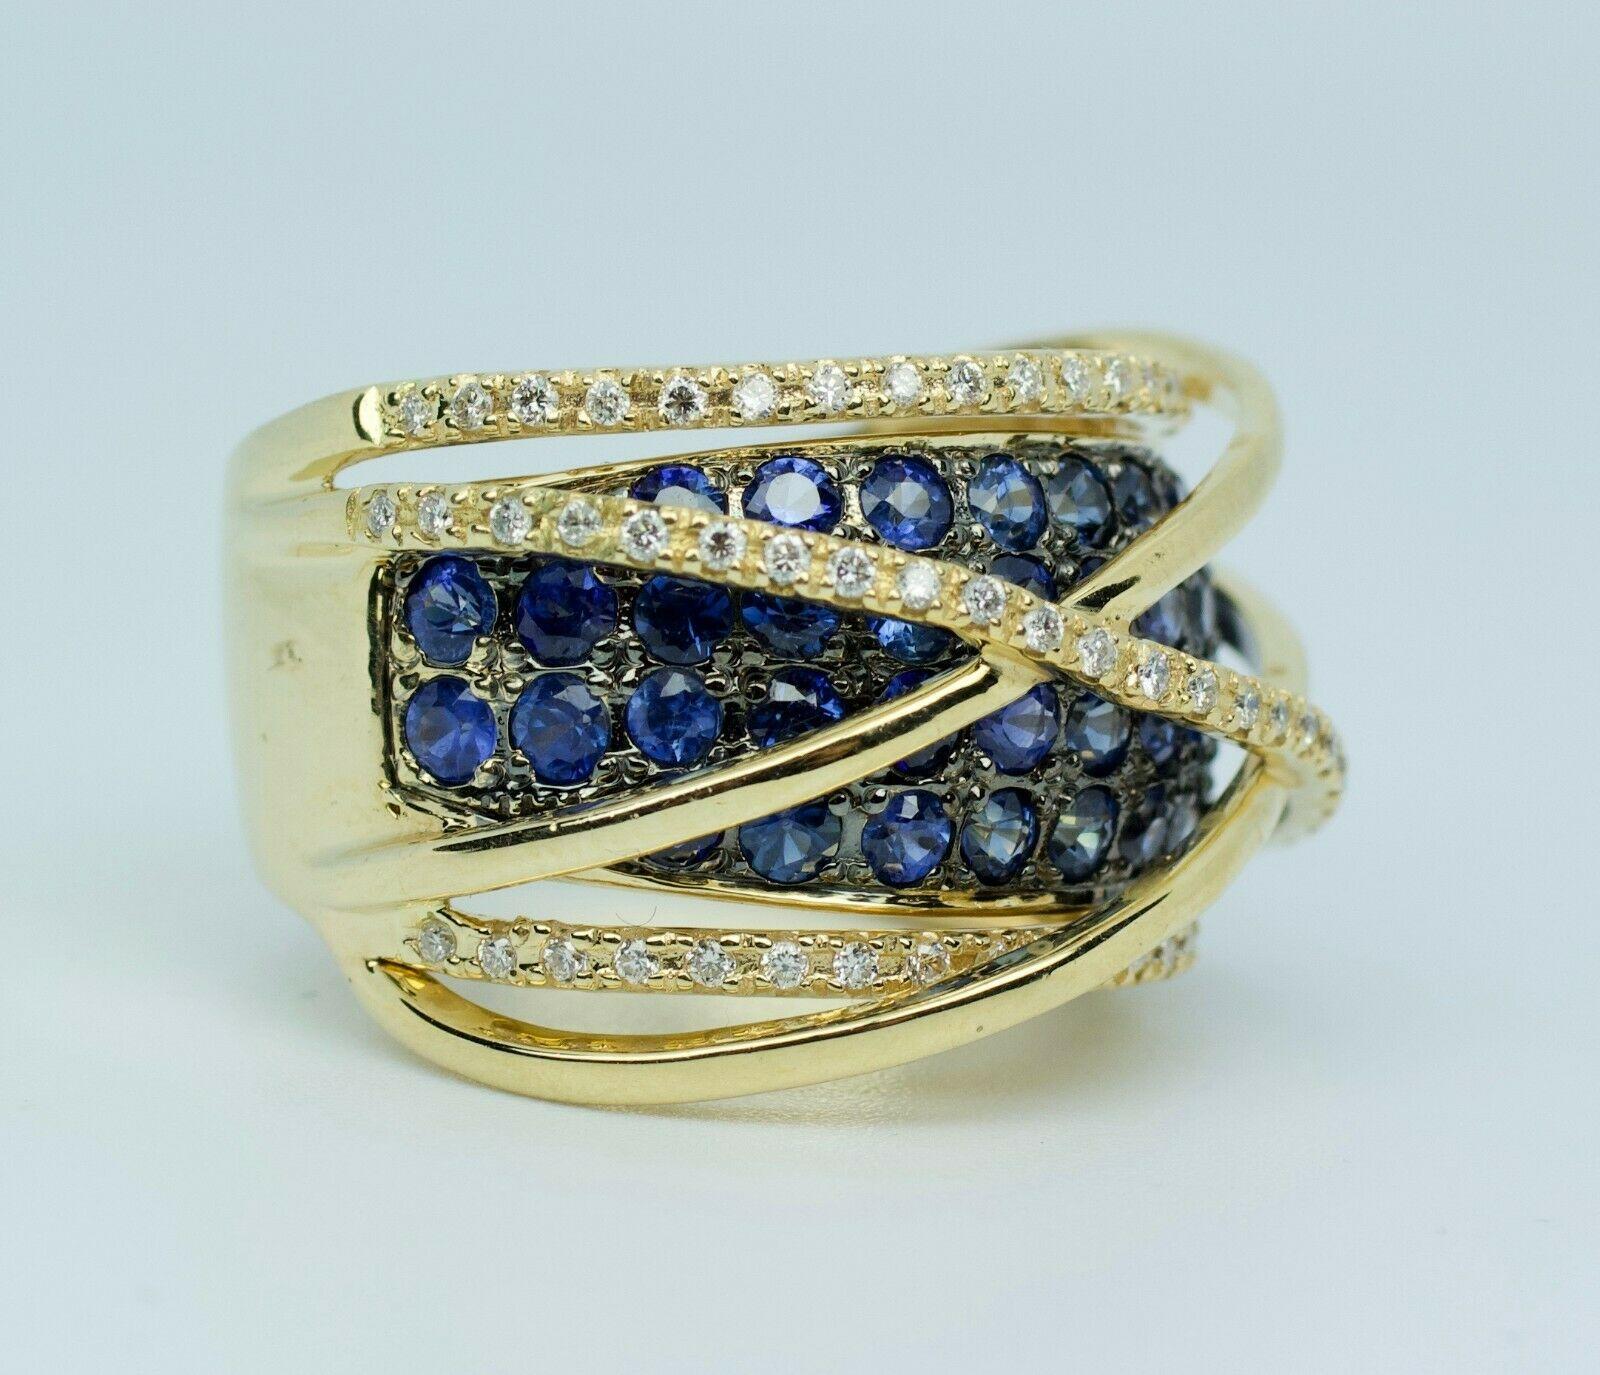 Le Vian 14k Yellow Gold White Round Diamond And Blue Sapphire Ring

12 Grams

Ring Size 7.5

This is a beautiful Le Vian ring. This ring is a beautiful band that shows off these bright blue sapphires! If you have any questions or concerns please do